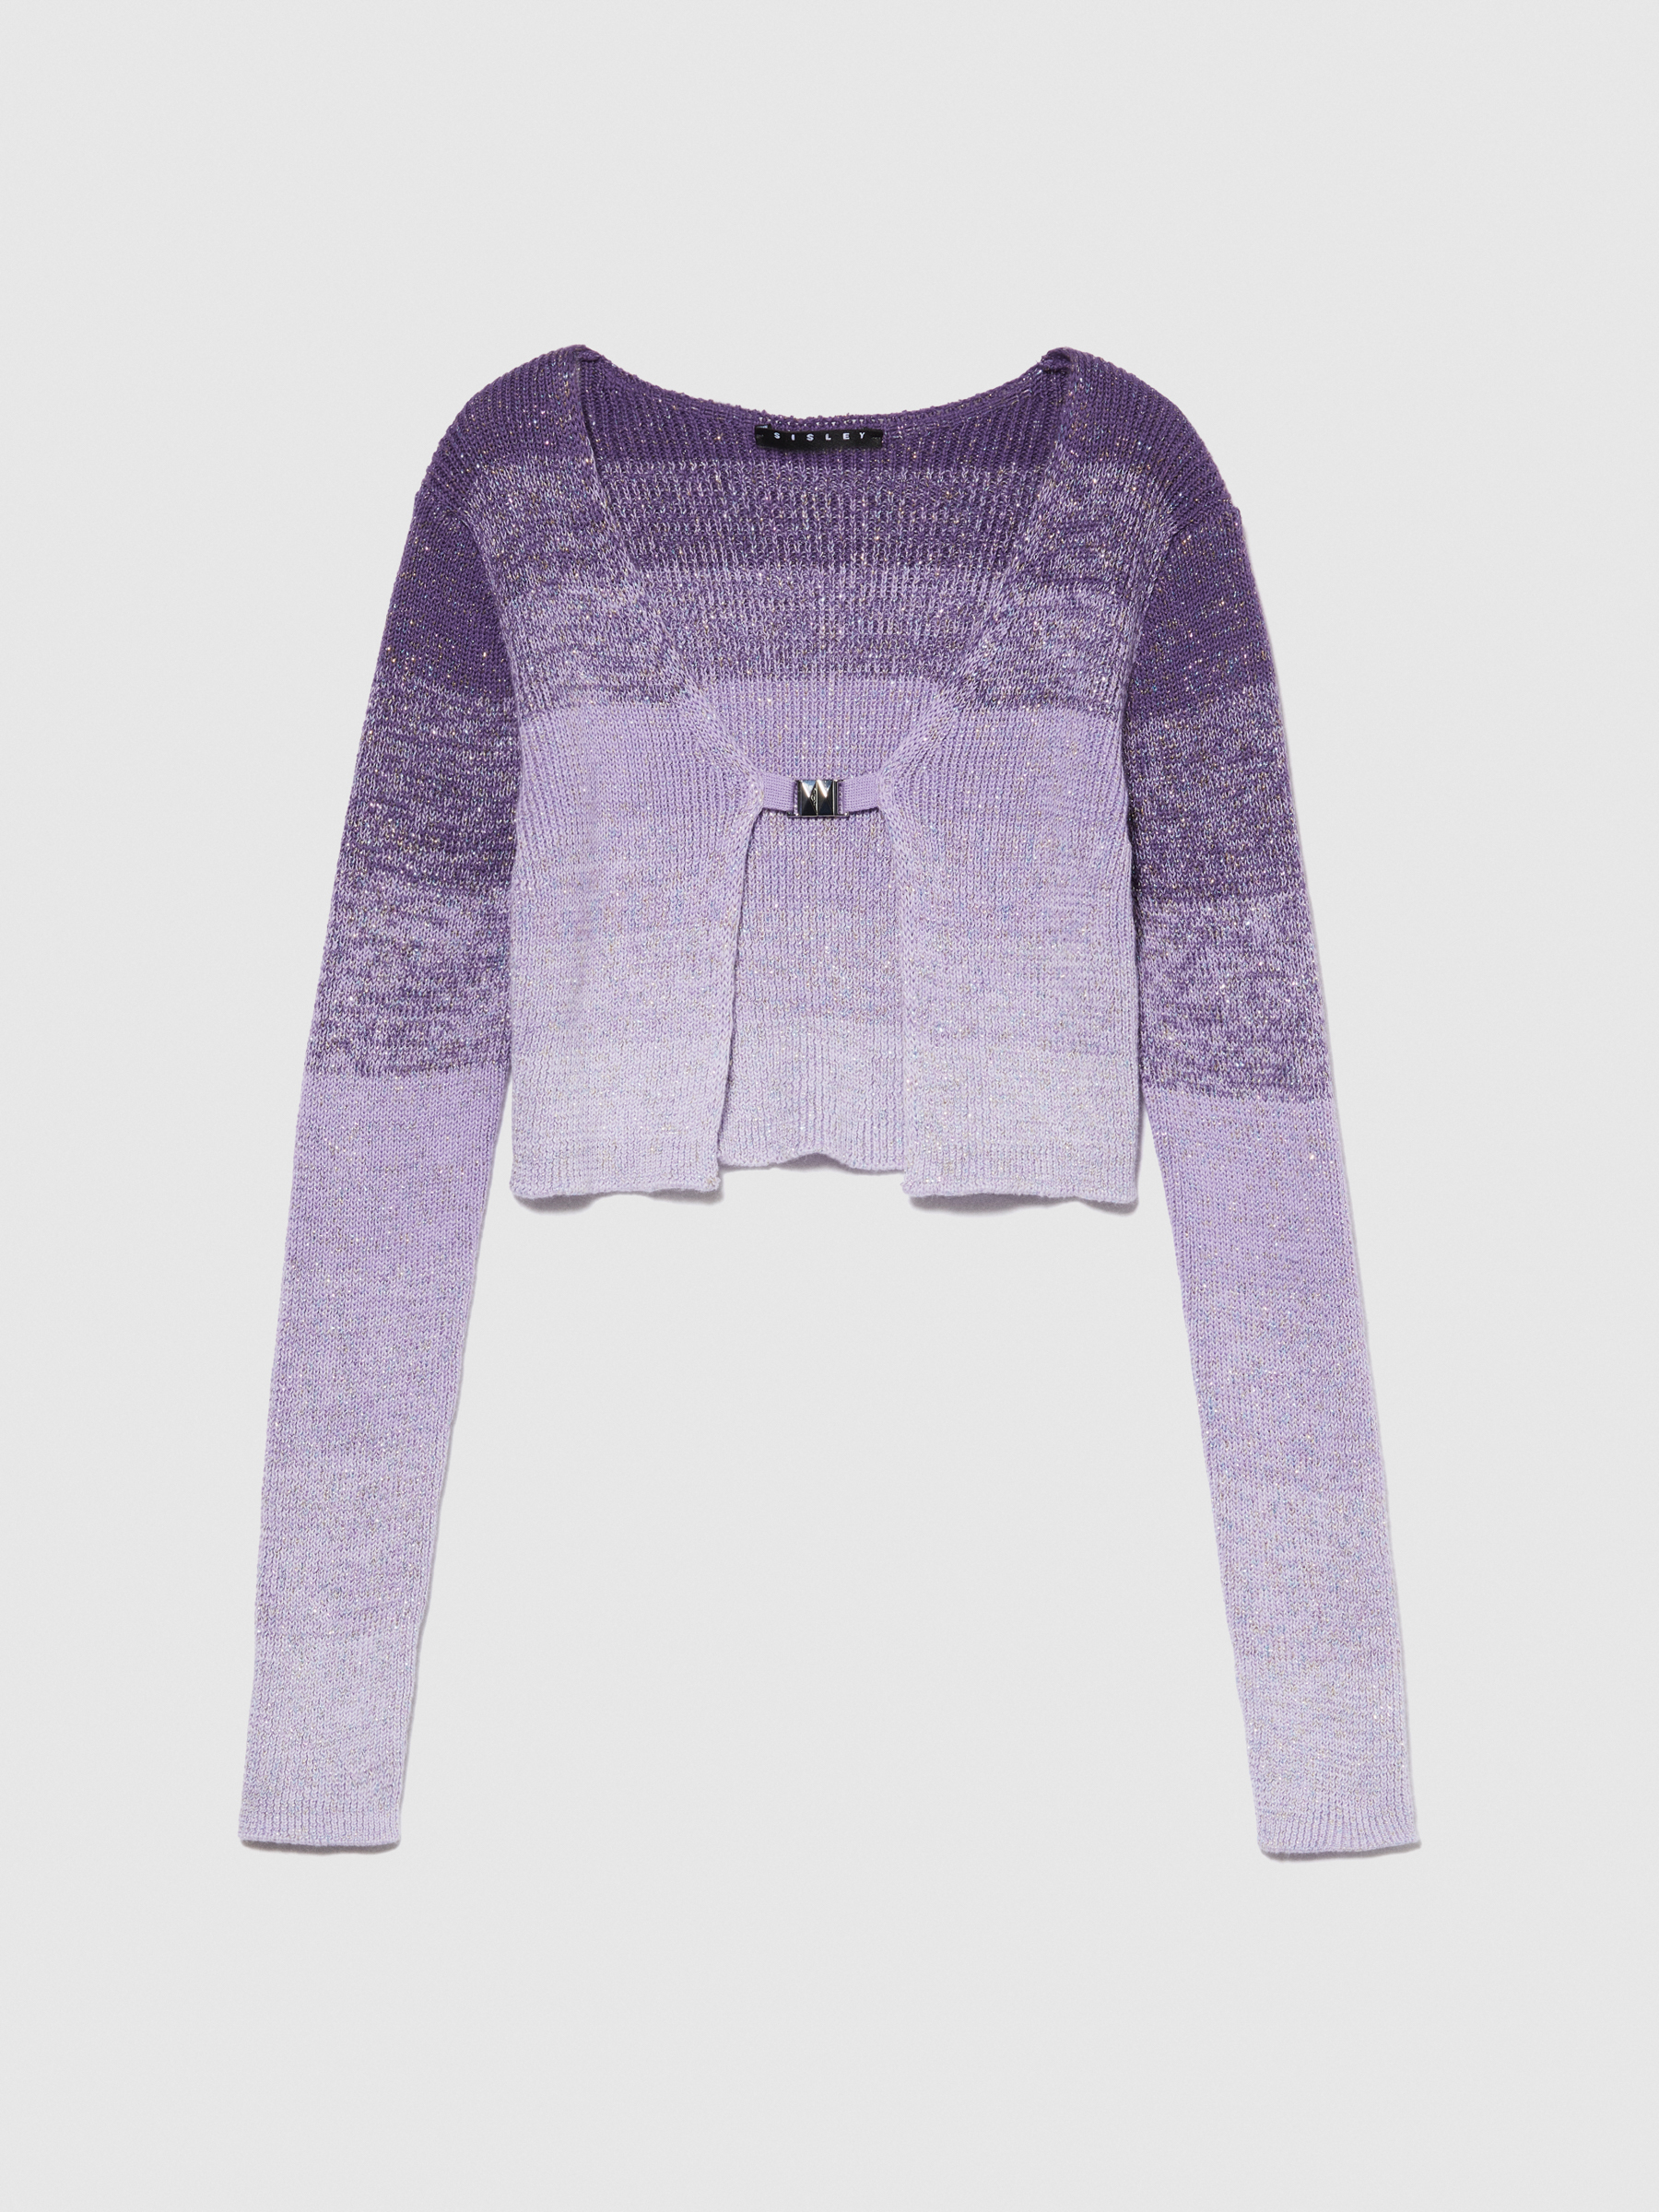 Sisley Young - Faded Lurex Cardigan, Woman, Lilac, Size: M